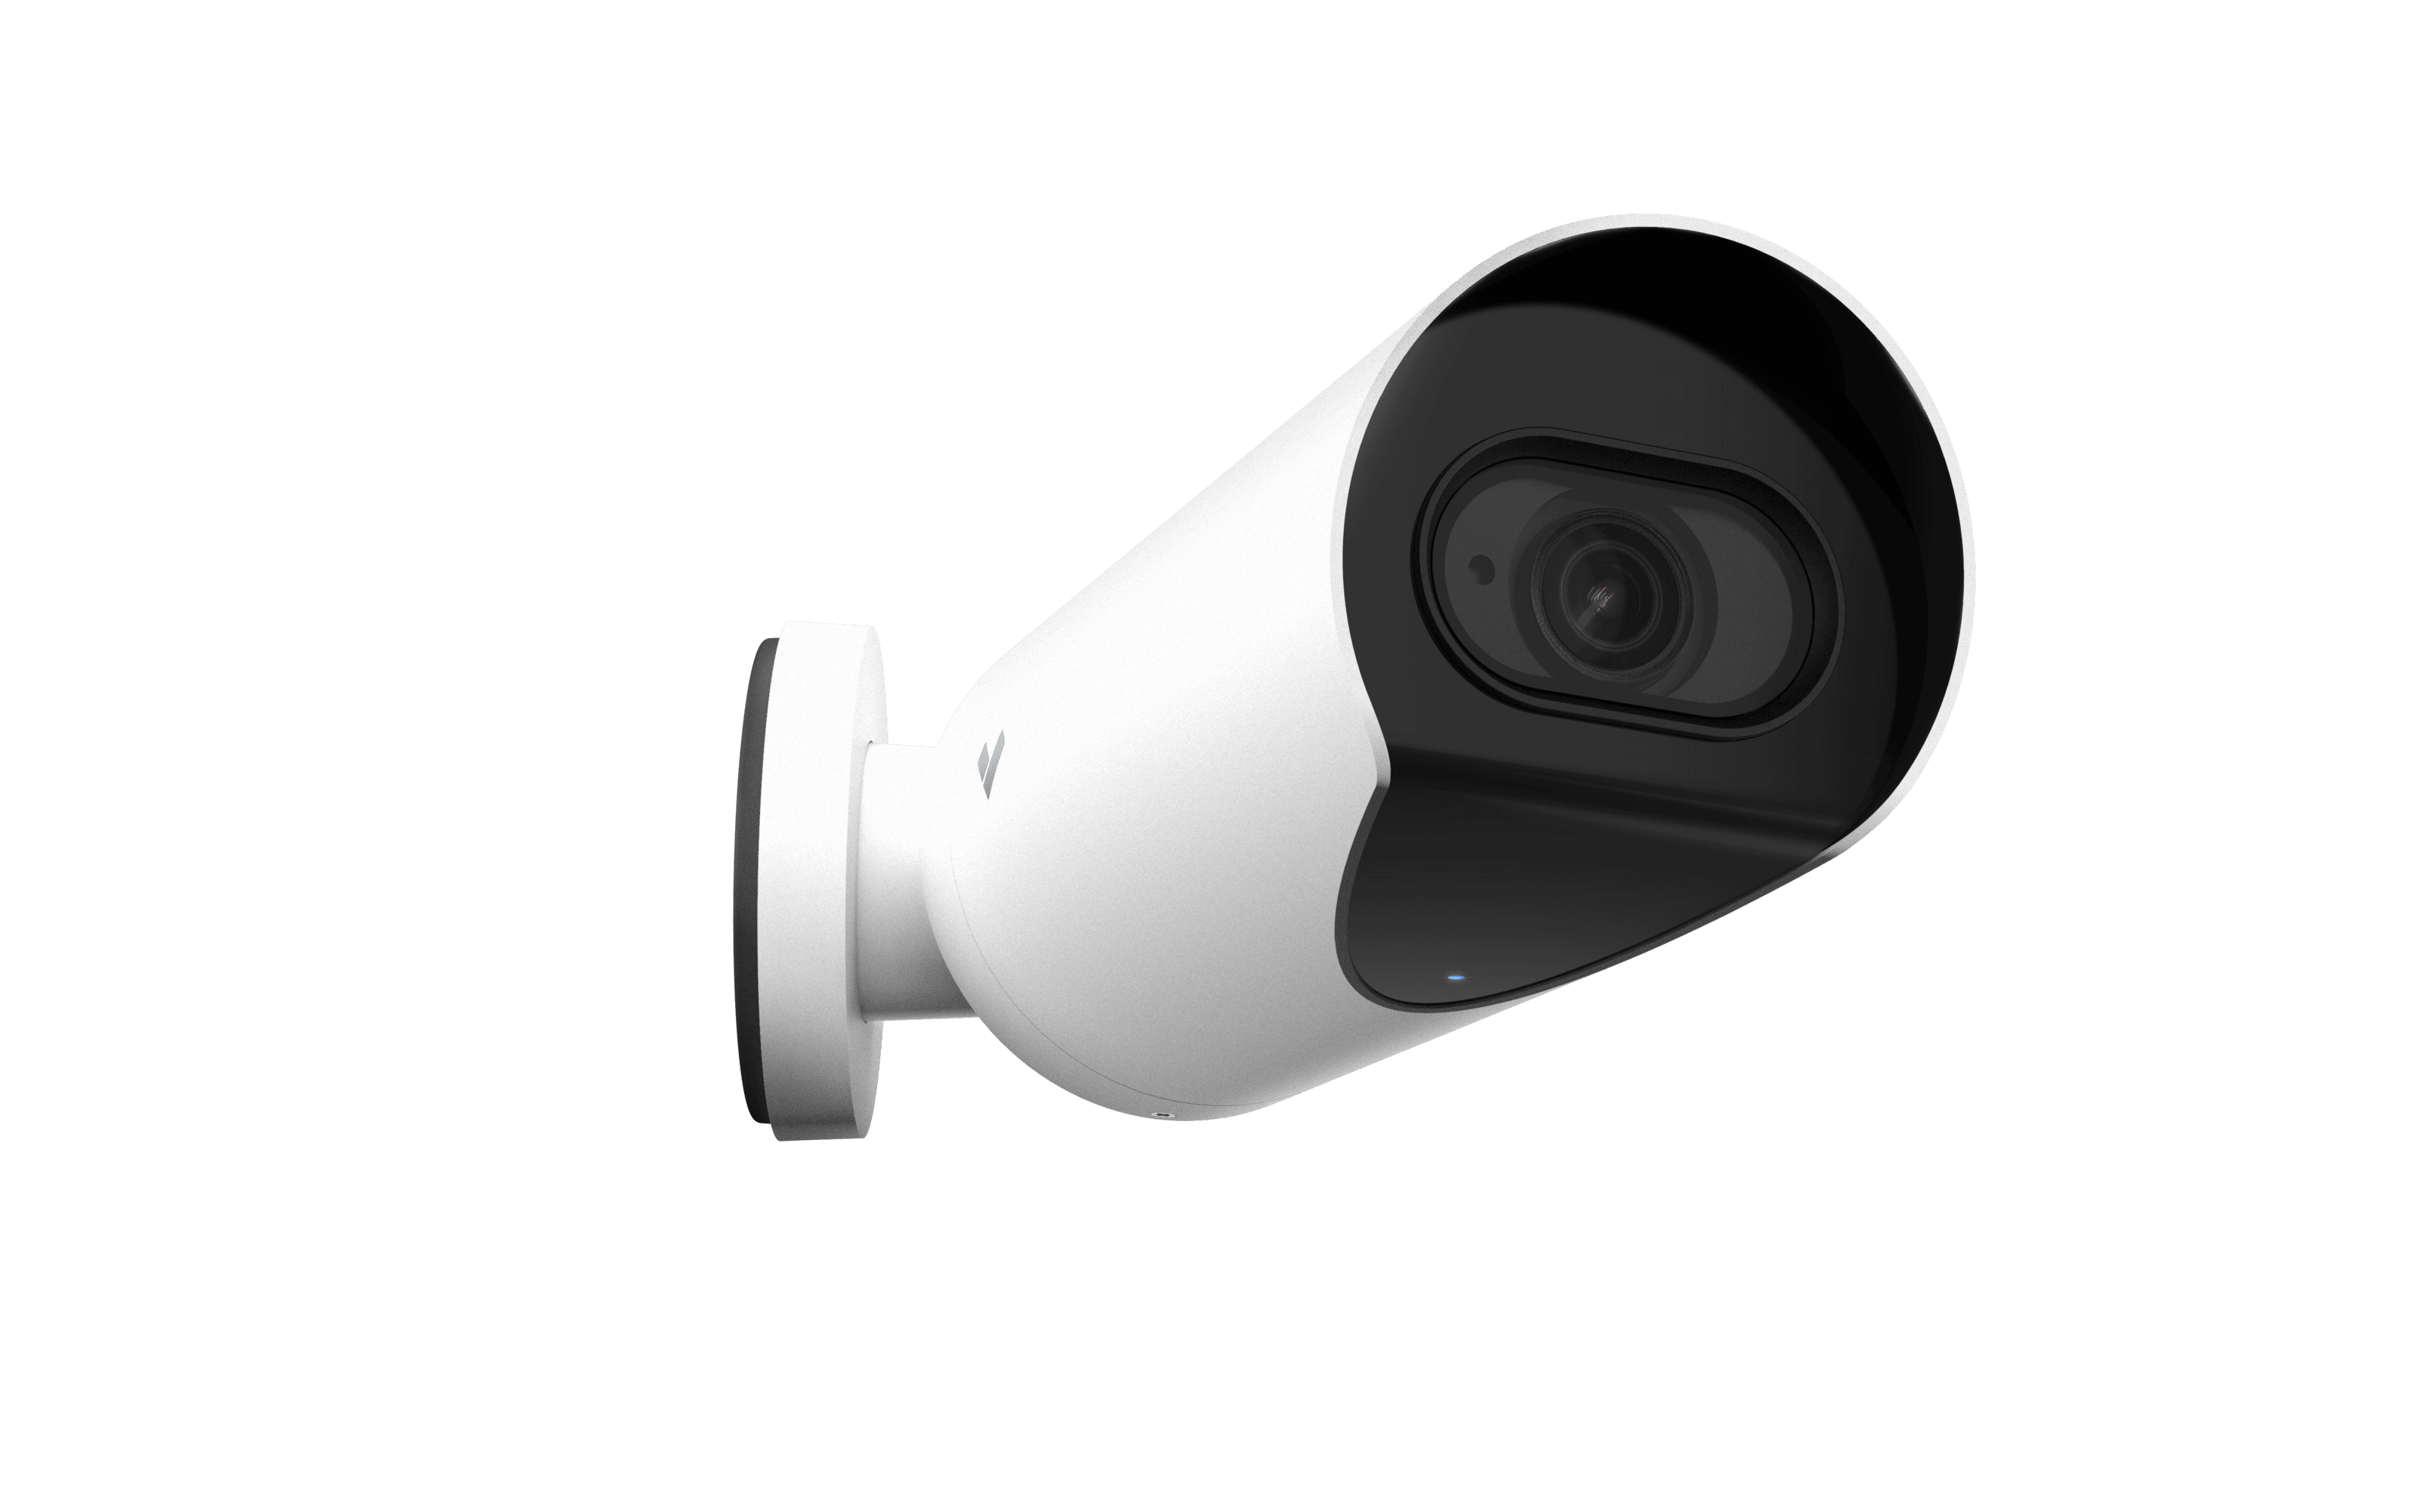 Verkada Bullet camera used for its crystal clear images